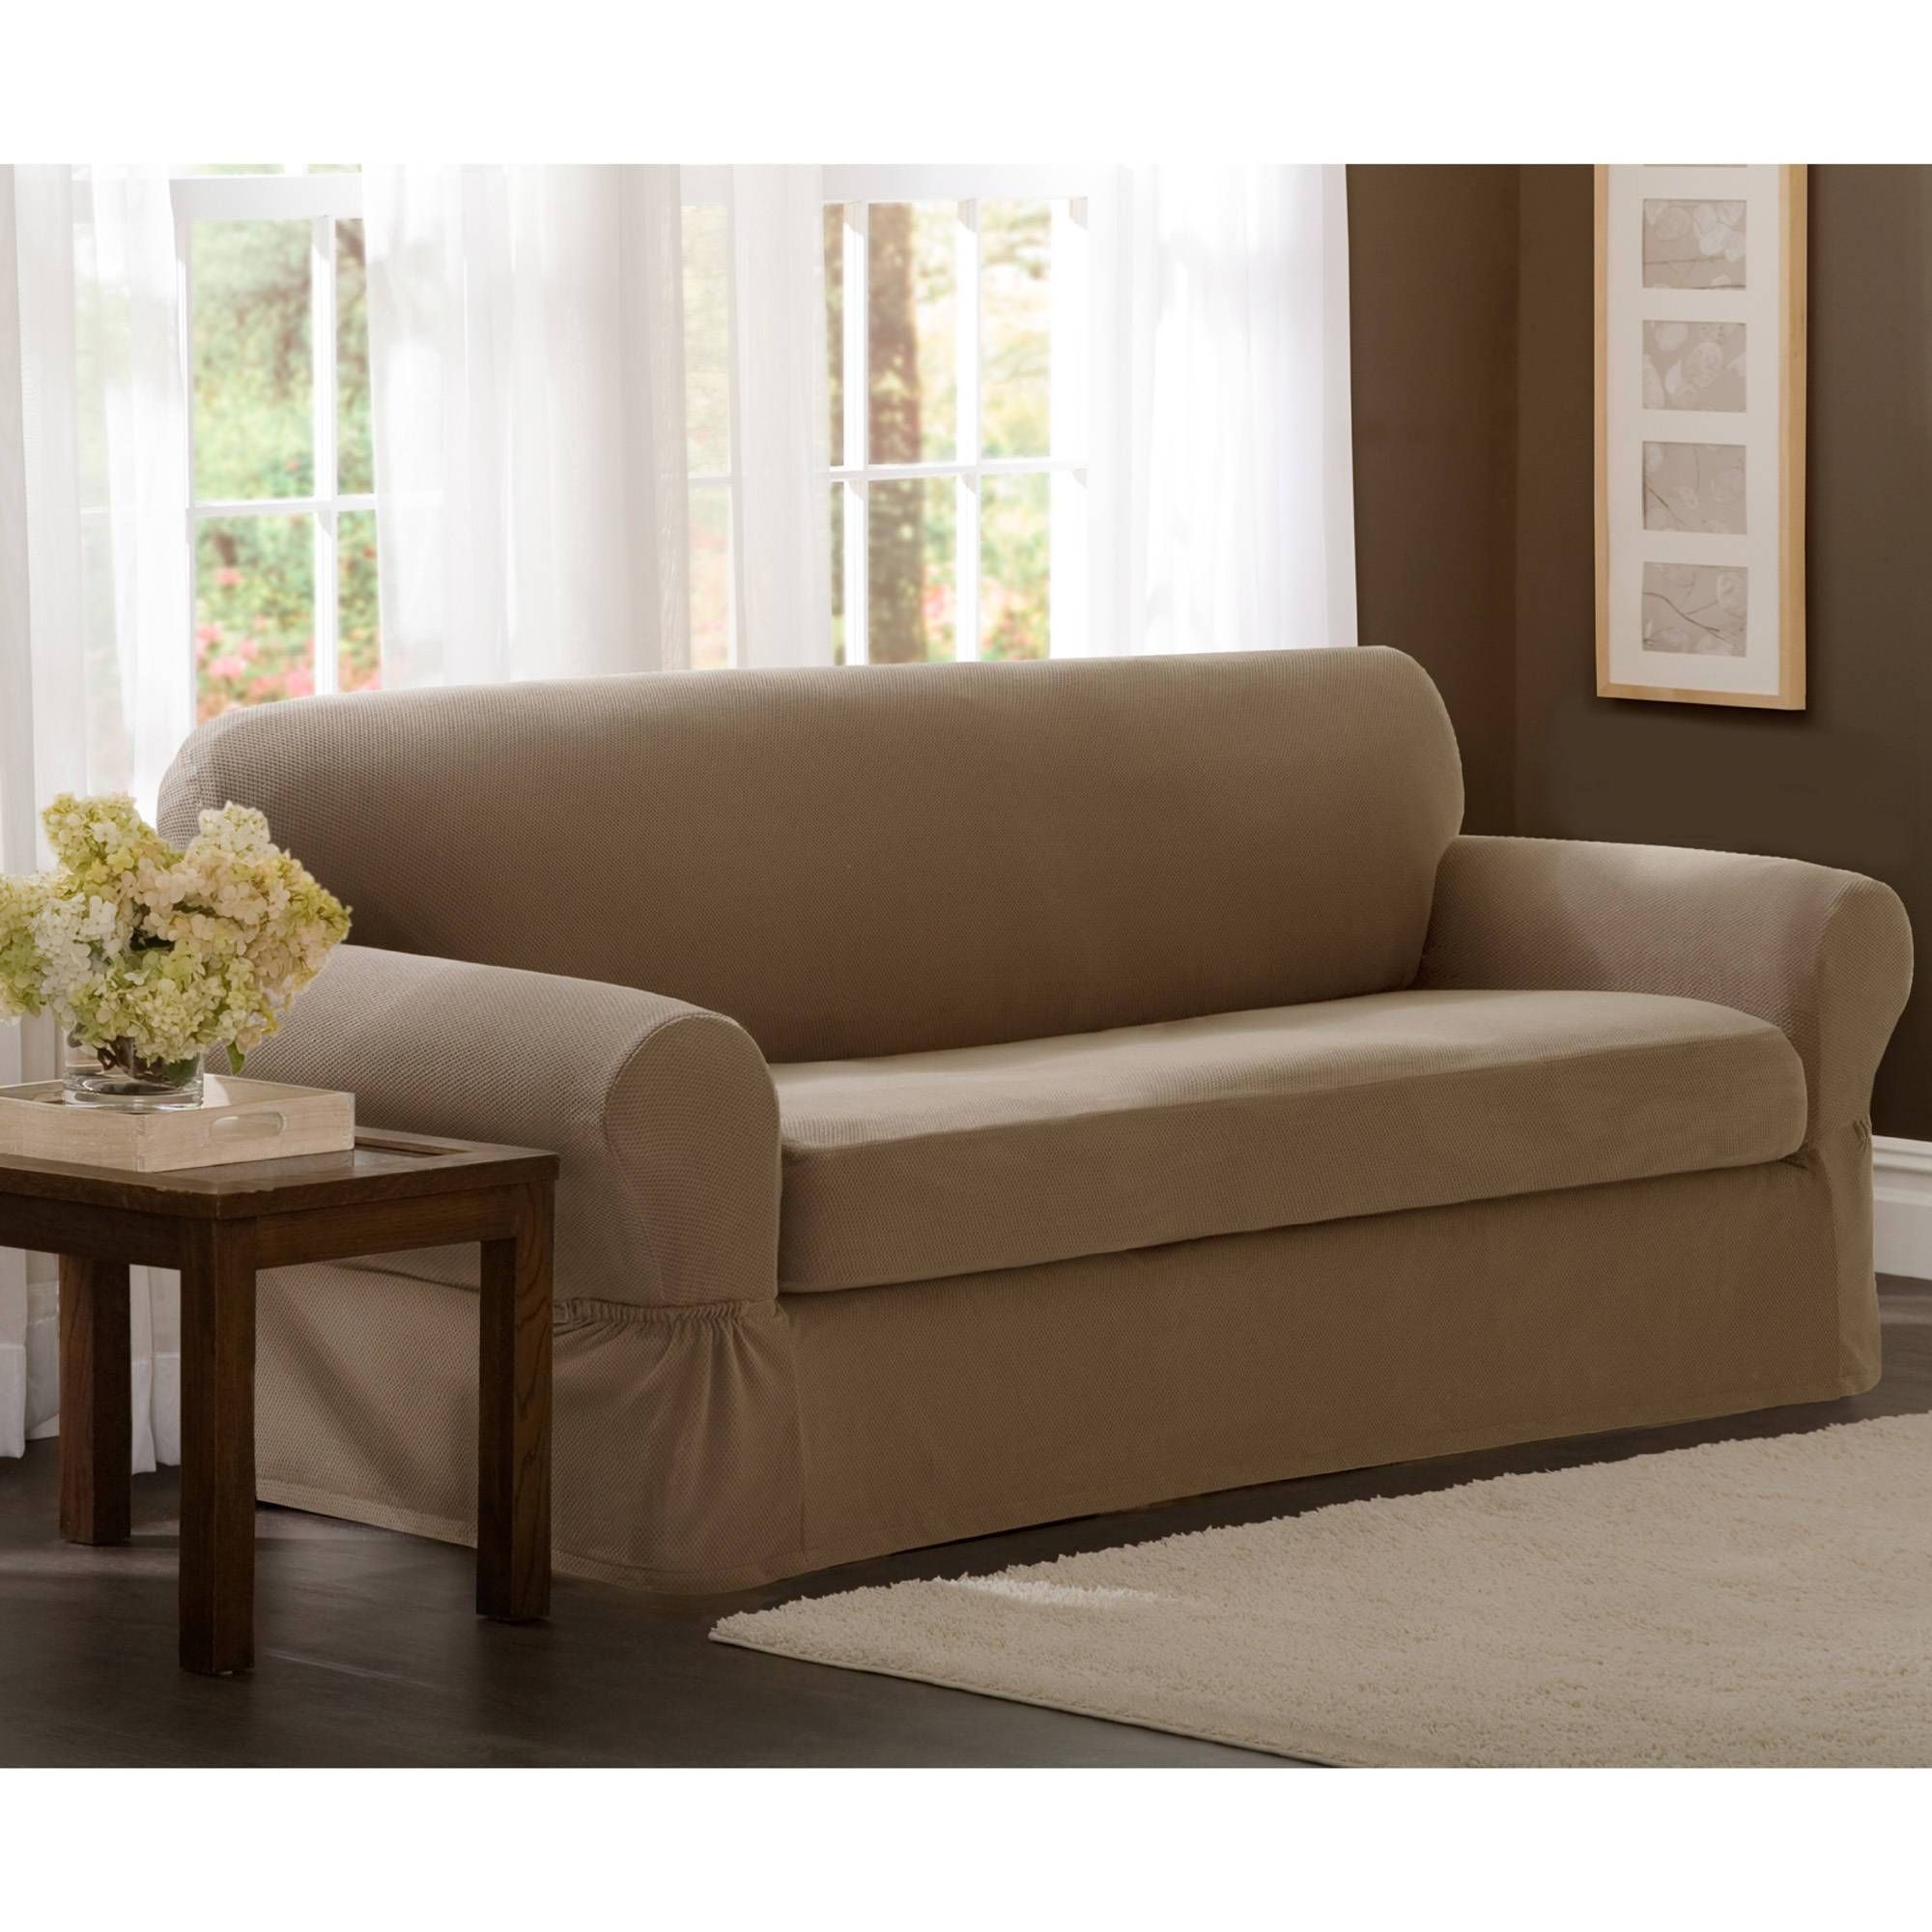 Furniture: Update Your Living Room With Best Sofa Slipcover Design Throughout Walmart Slipcovers For Sofas (Photo 5 of 30)